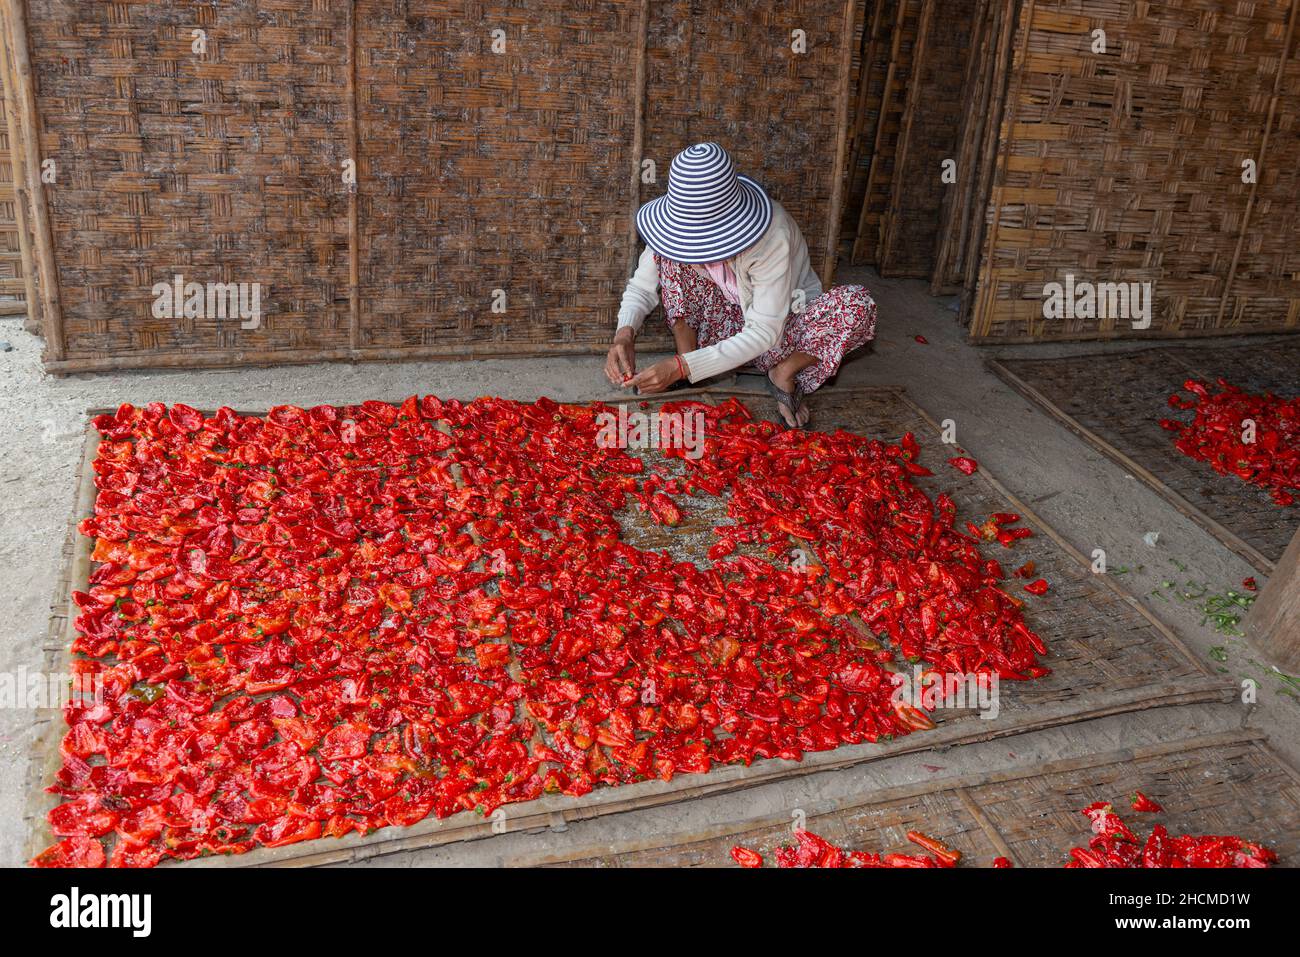 Woman crouching  salting cooked chili peppers on bamboo trays in preparation of a chili peppers cottage industry,Cambodia, Southeast Asia Stock Photo